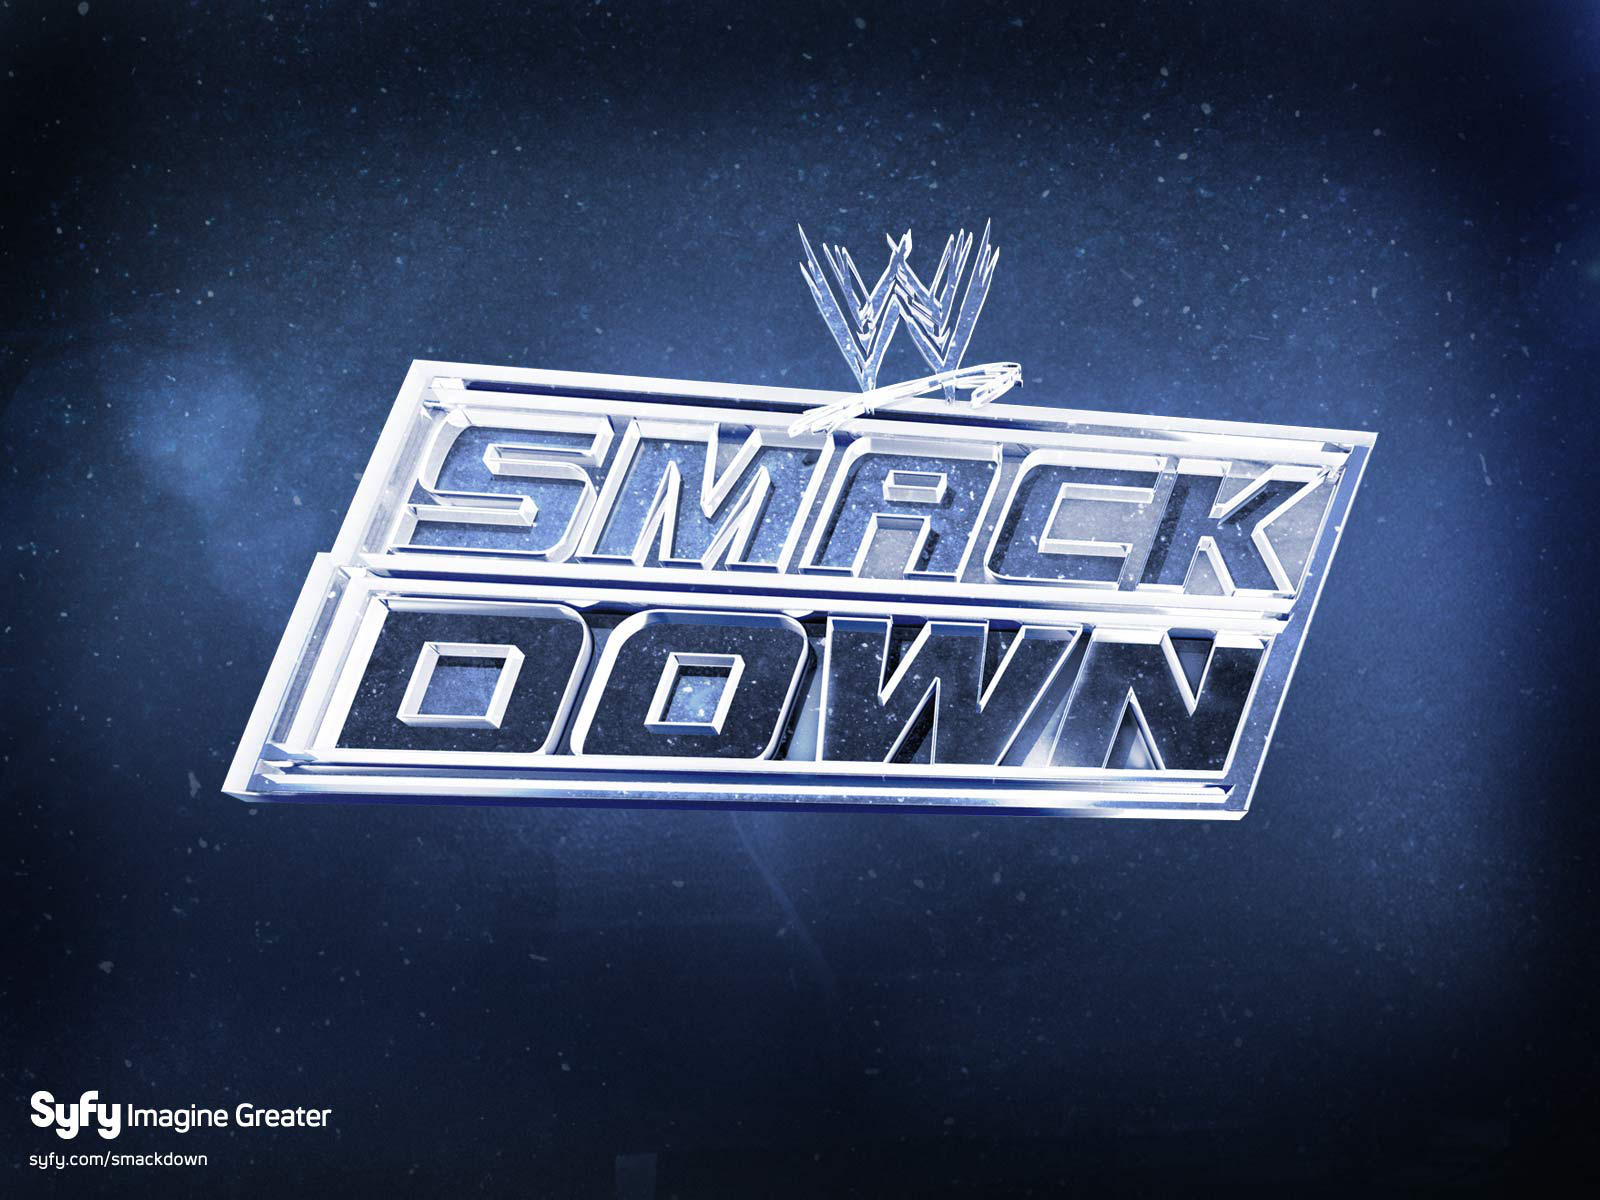 Smackdown Background. Paige Smackdown Wallpaper, Smackdown Vs. Raw Wallpaper and Smackdown Background